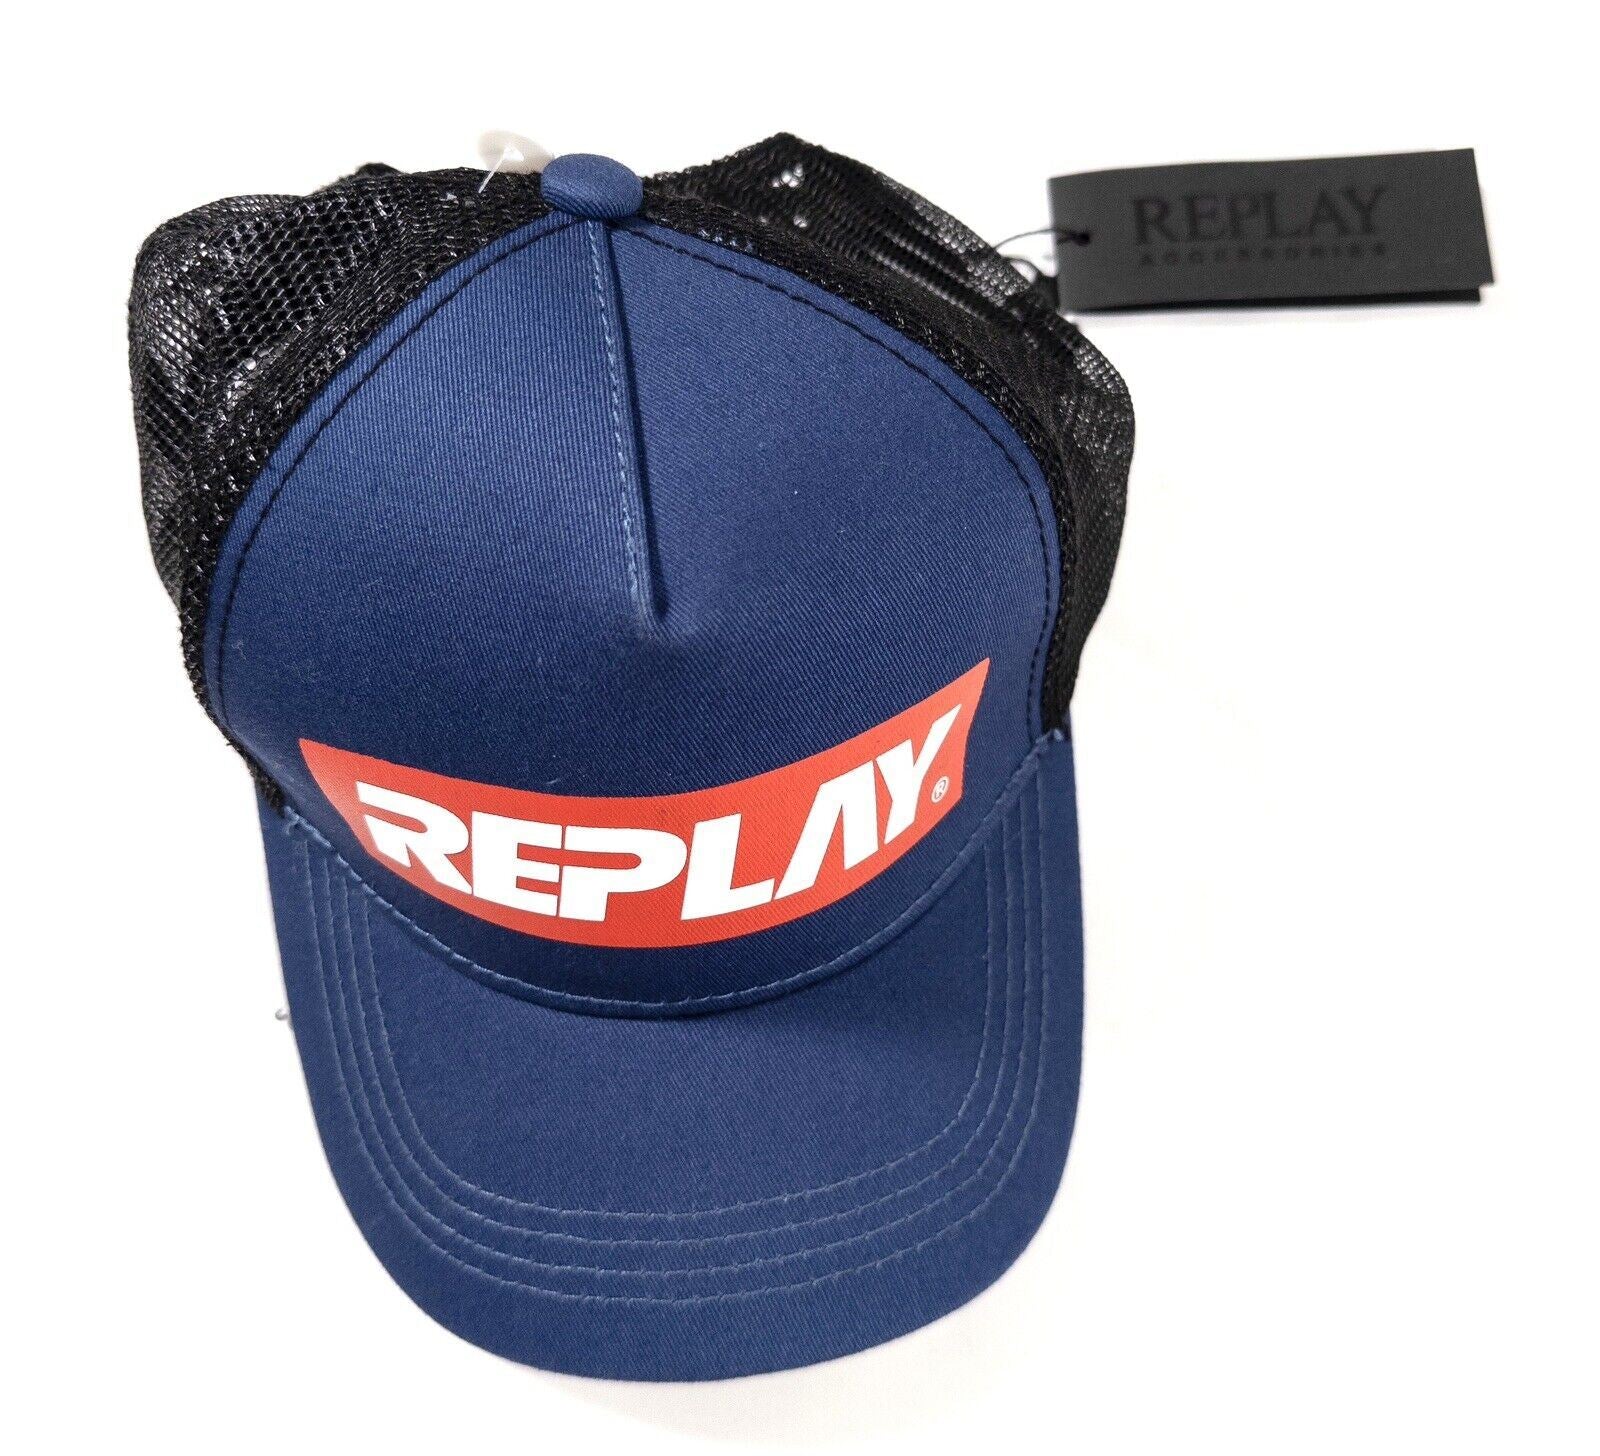 REPLAY Women's Baseball Cap Trucker Hat Blue and Black Size One Size